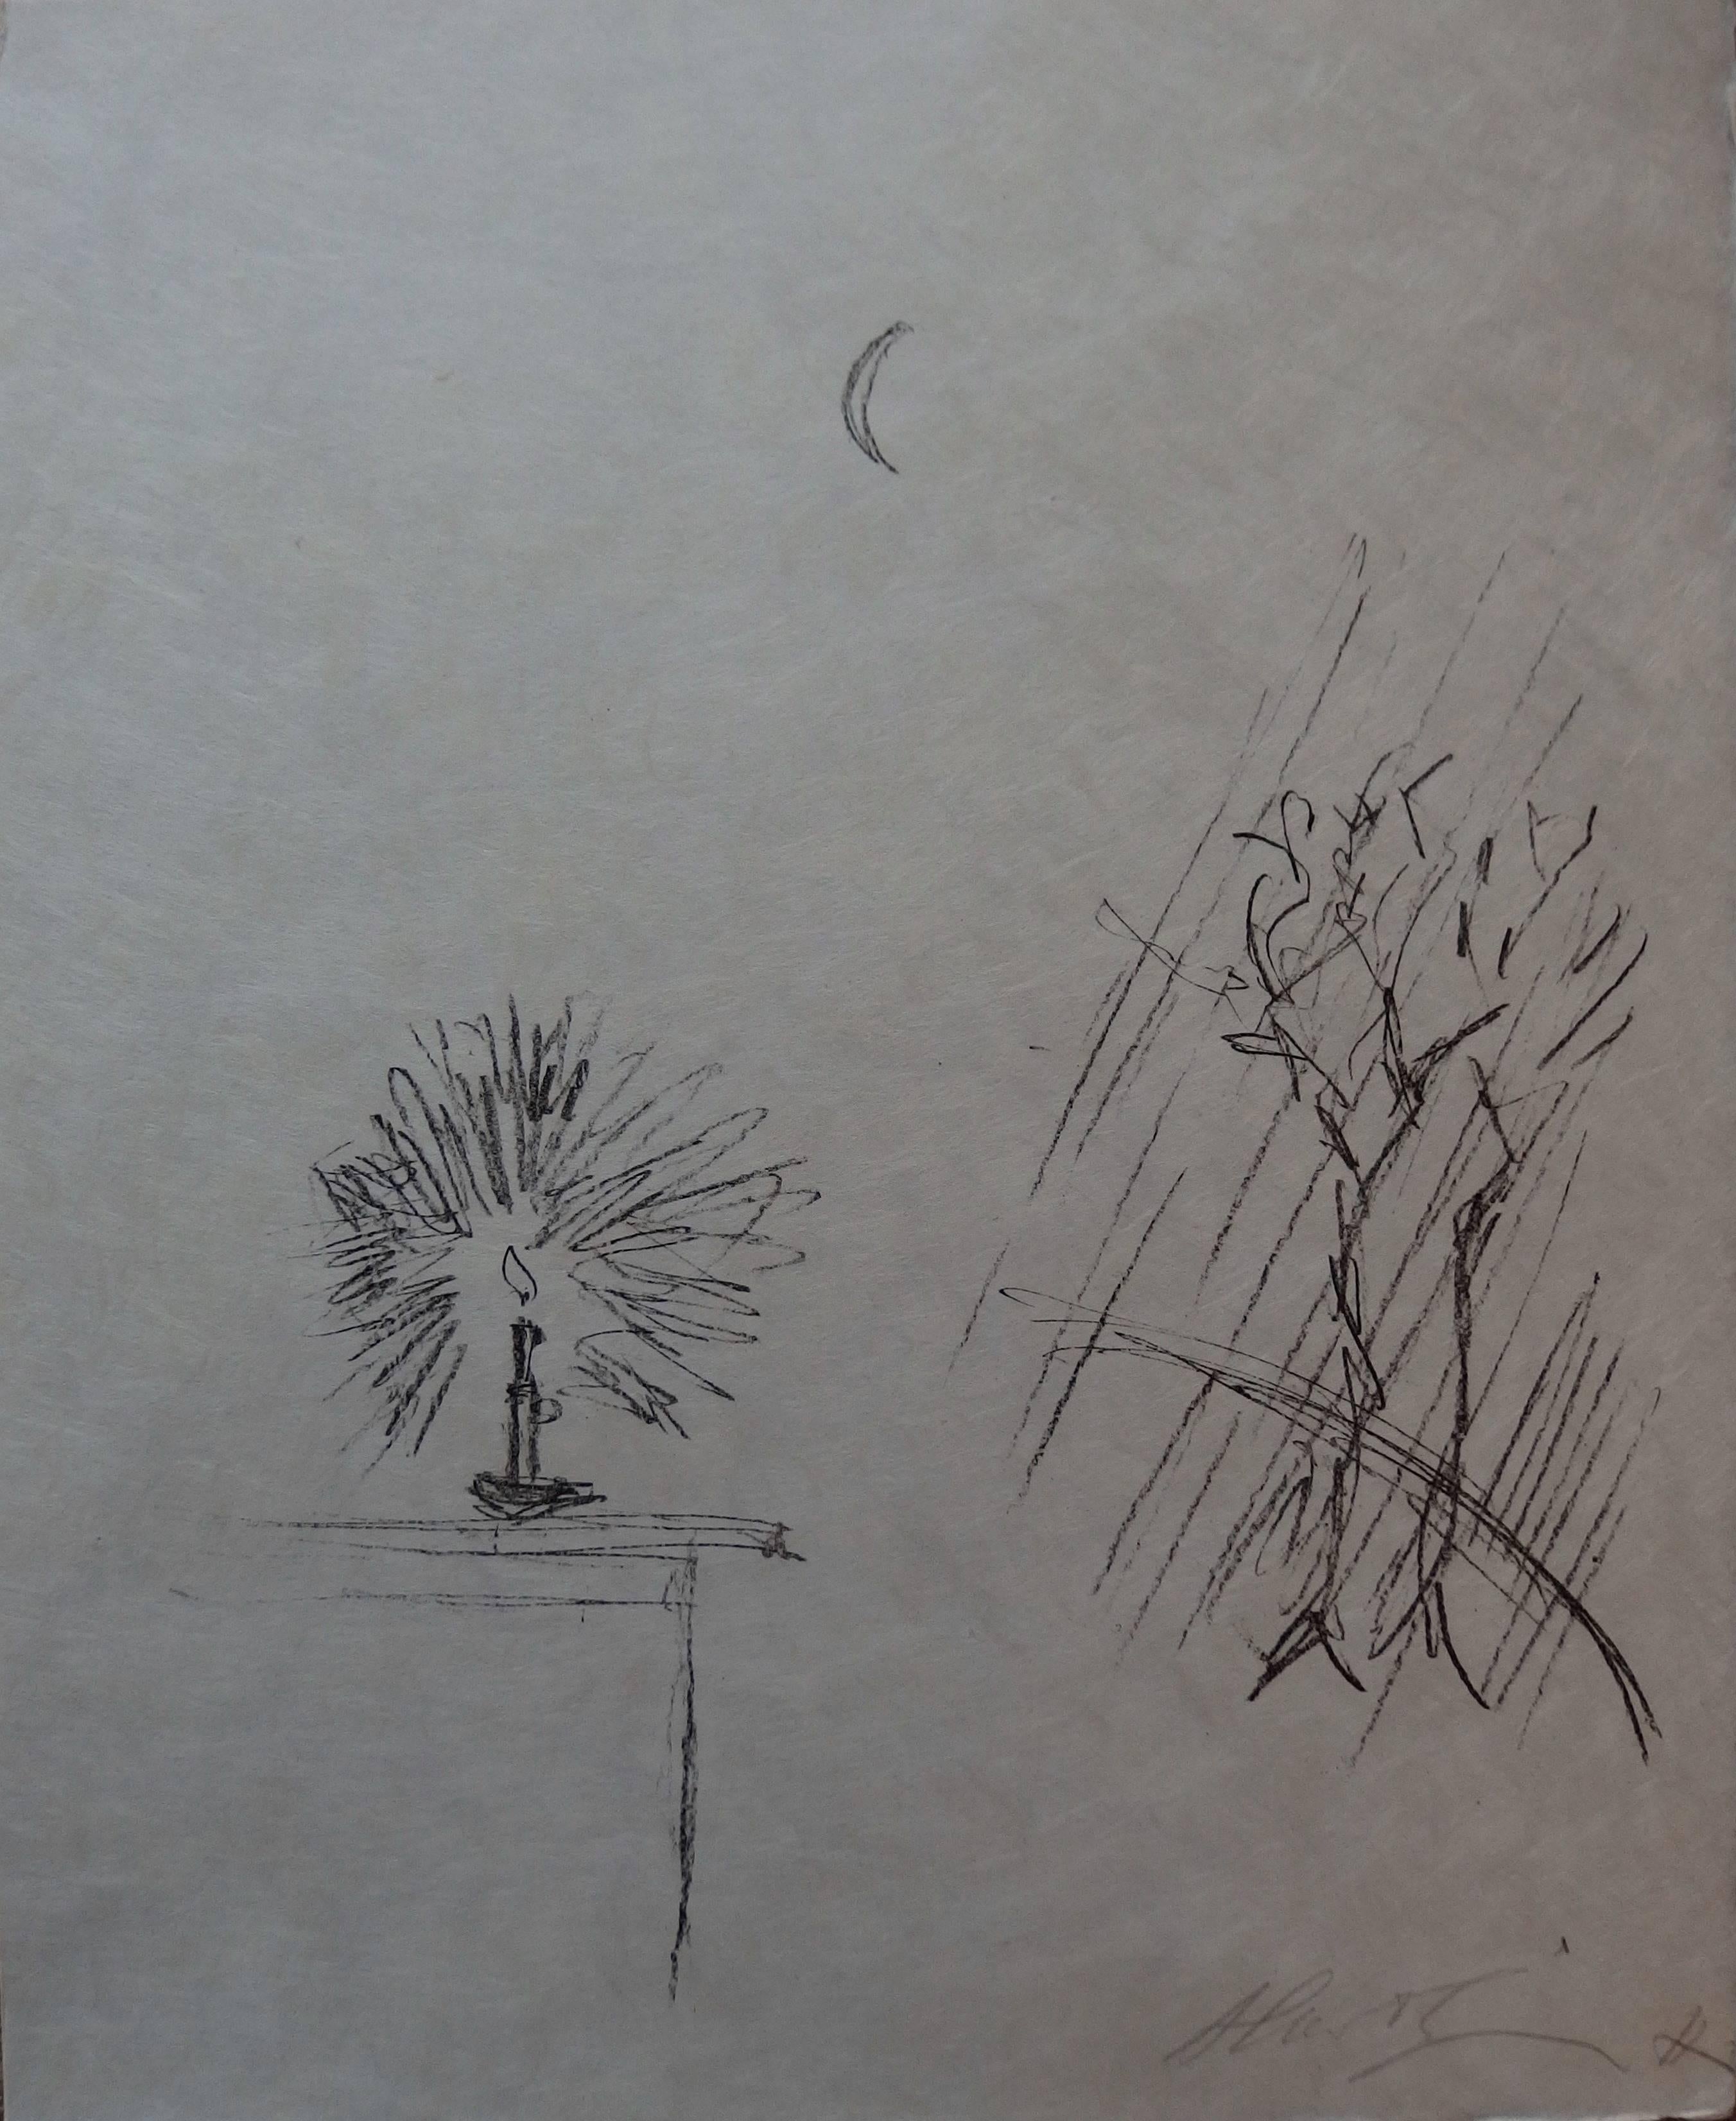 Alberto Giacometti Interior Print - The Candle - Original Lithograph - Handsigned & Limited 23copies / 1961